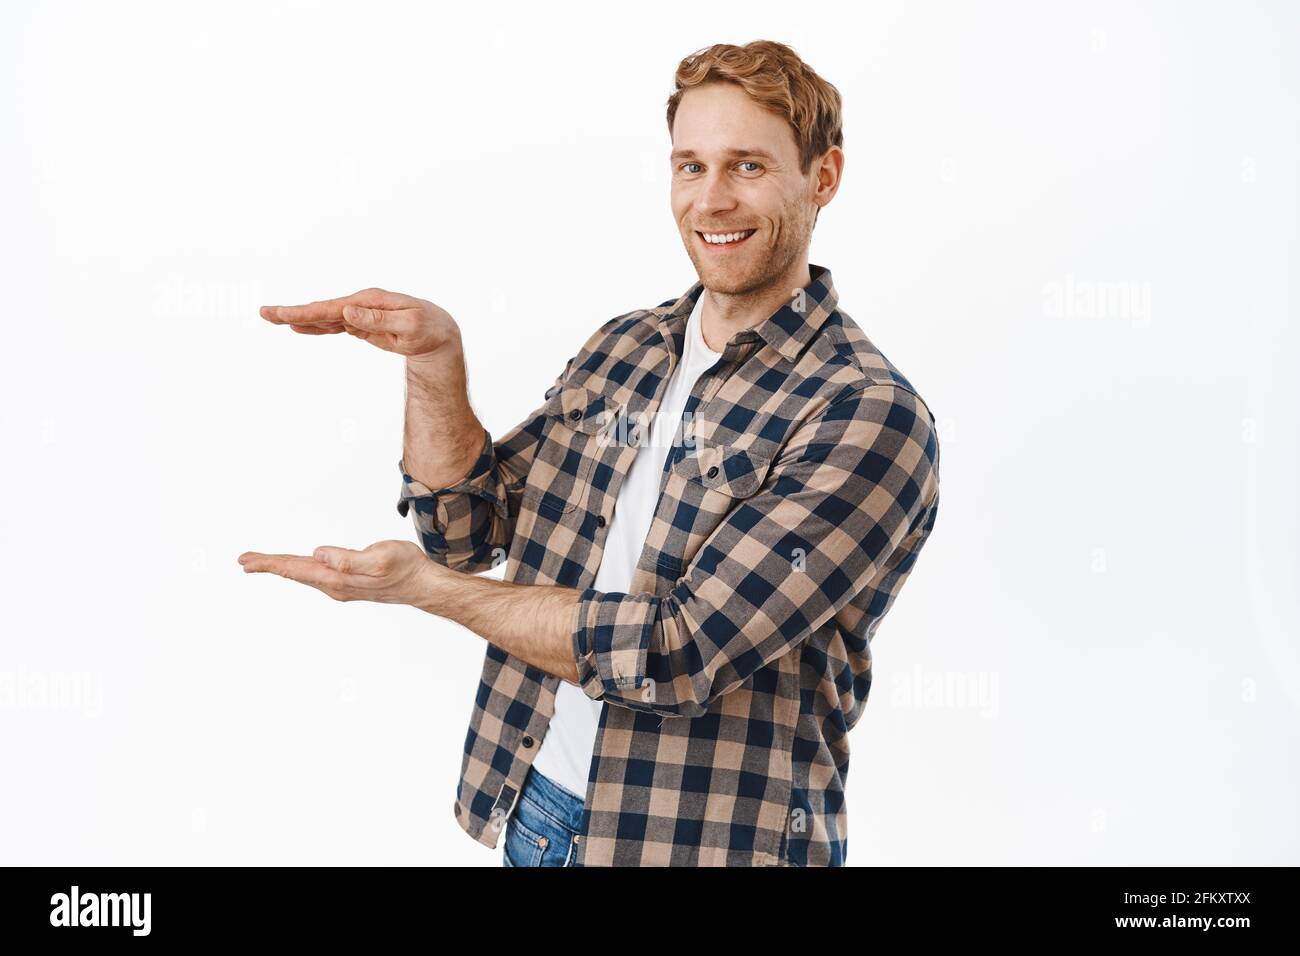 Image of strong and handsome redhead man holding your product logo against white copyspace, making empty box gesture and smiling at camera, display Stock Photo